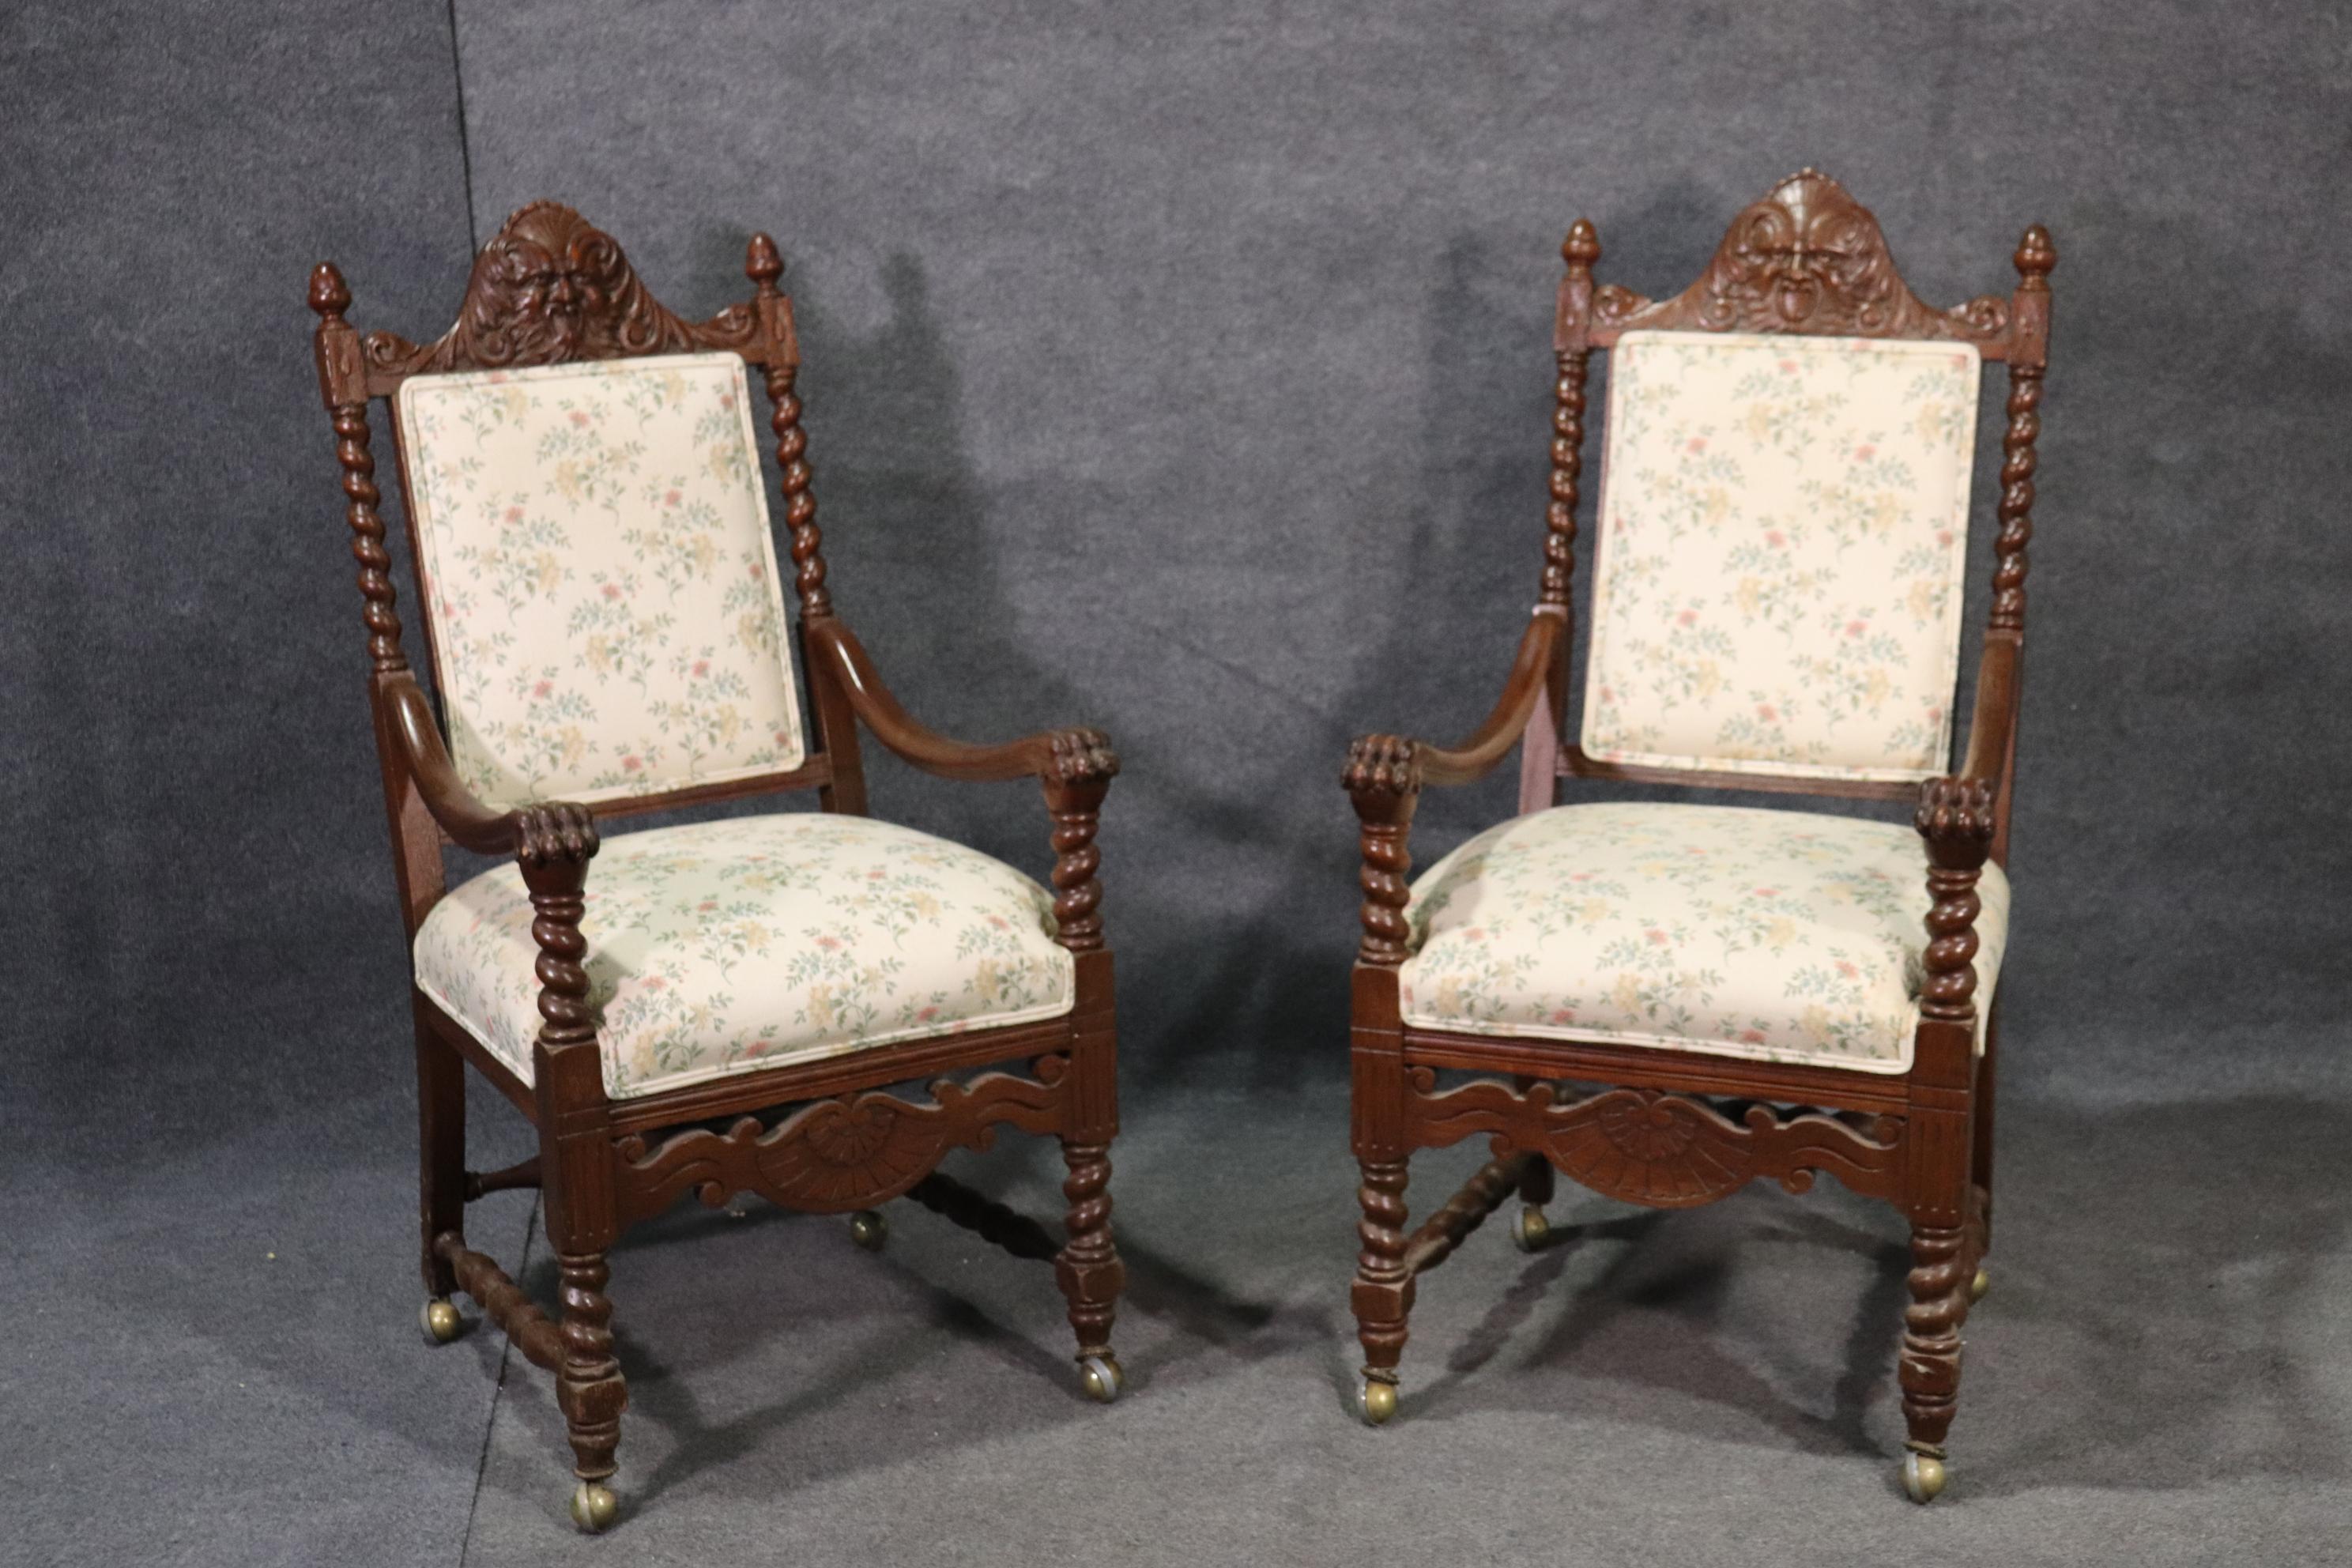 These Victorian 1870s era RJ Hroner style dining chairs are in good condition and feature grotesque northwind faces and great barley twist columns. The chairs measure 47 inches tall x 25 inches wide x 26 inches deep and the seat height is 22 inches.